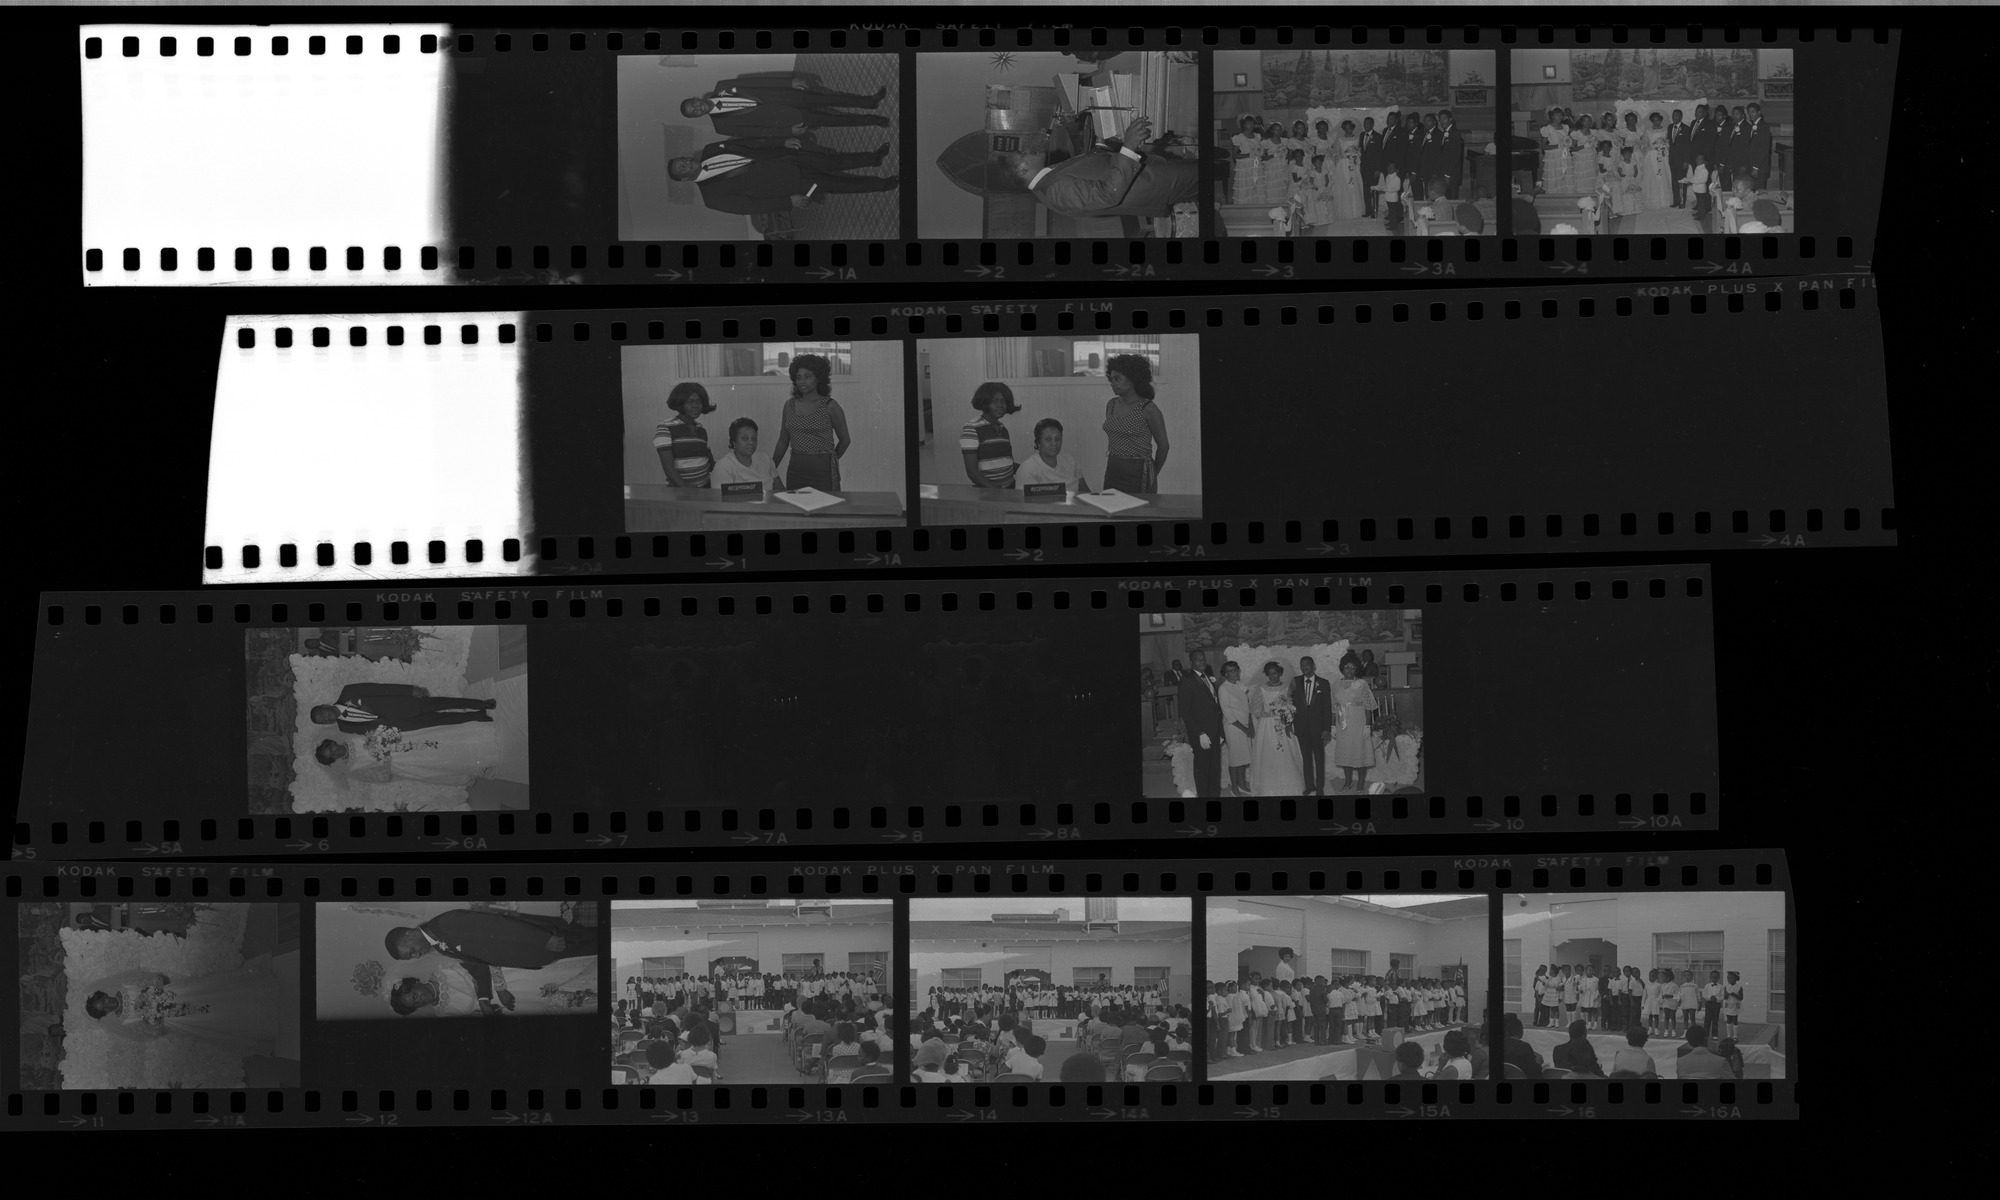 Set of negatives by Clinton Wright including Operation Independence Day Care graduation, Eloise Barnett's wedding, C.E.P. receptionist, and beauty contest at Doolittle, 1971, page 2